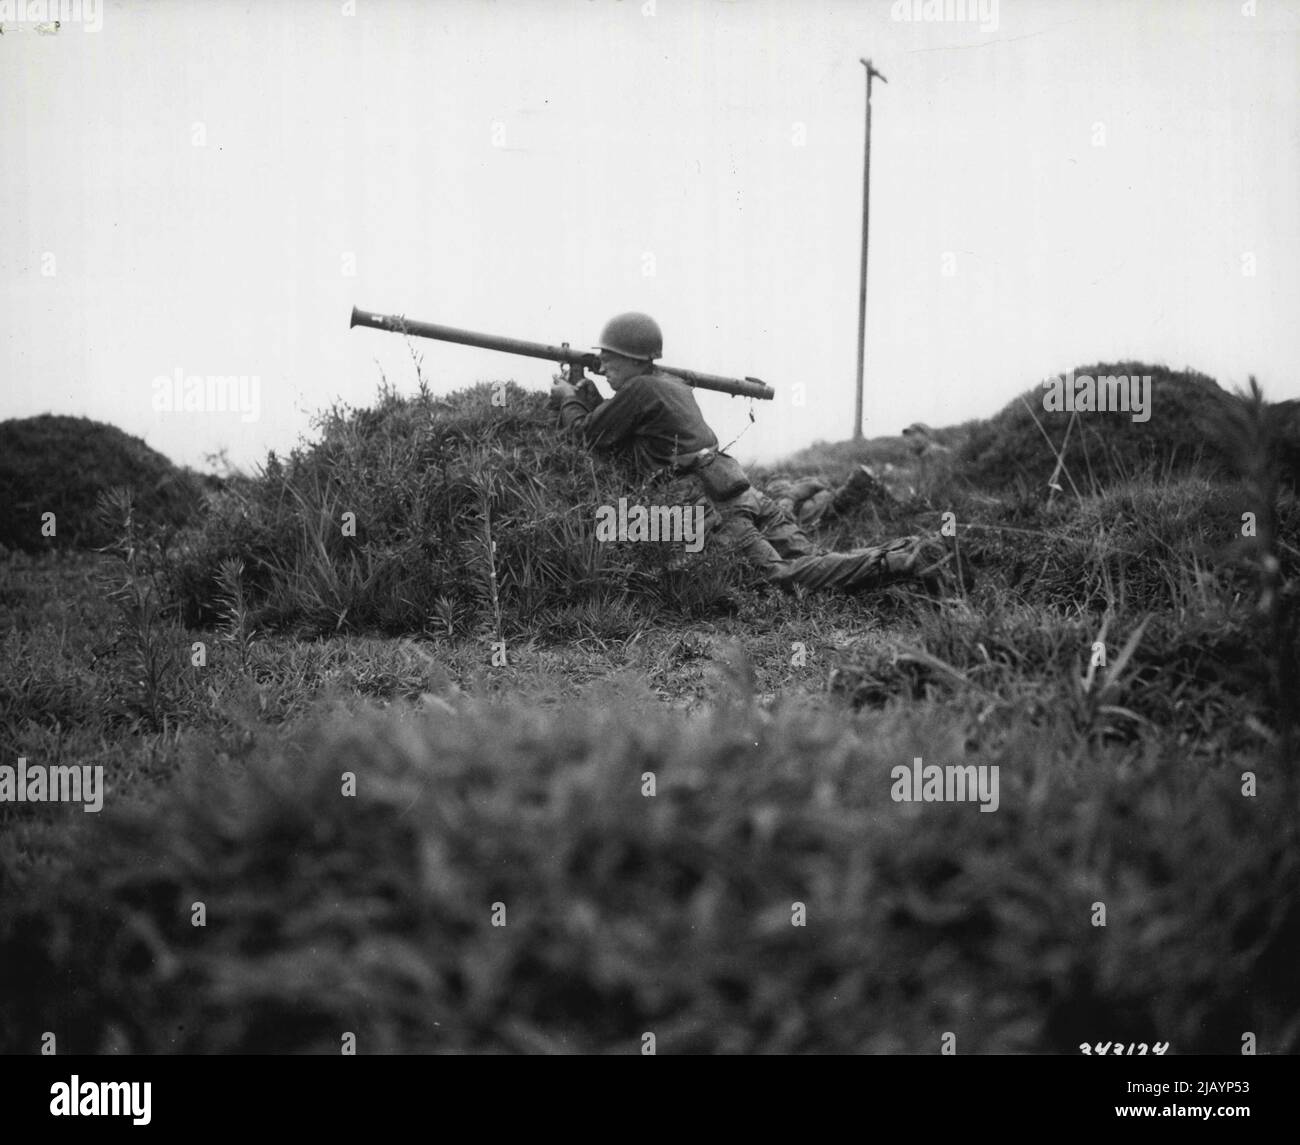 War In Korea -- A bazooka team fires against enemy tanks in the battle for South Korea. 2.36-inch Rocket Launcher 'Bazooka'. July 5, 1950. (Photo by U.S. Army Photograph). Stock Photo